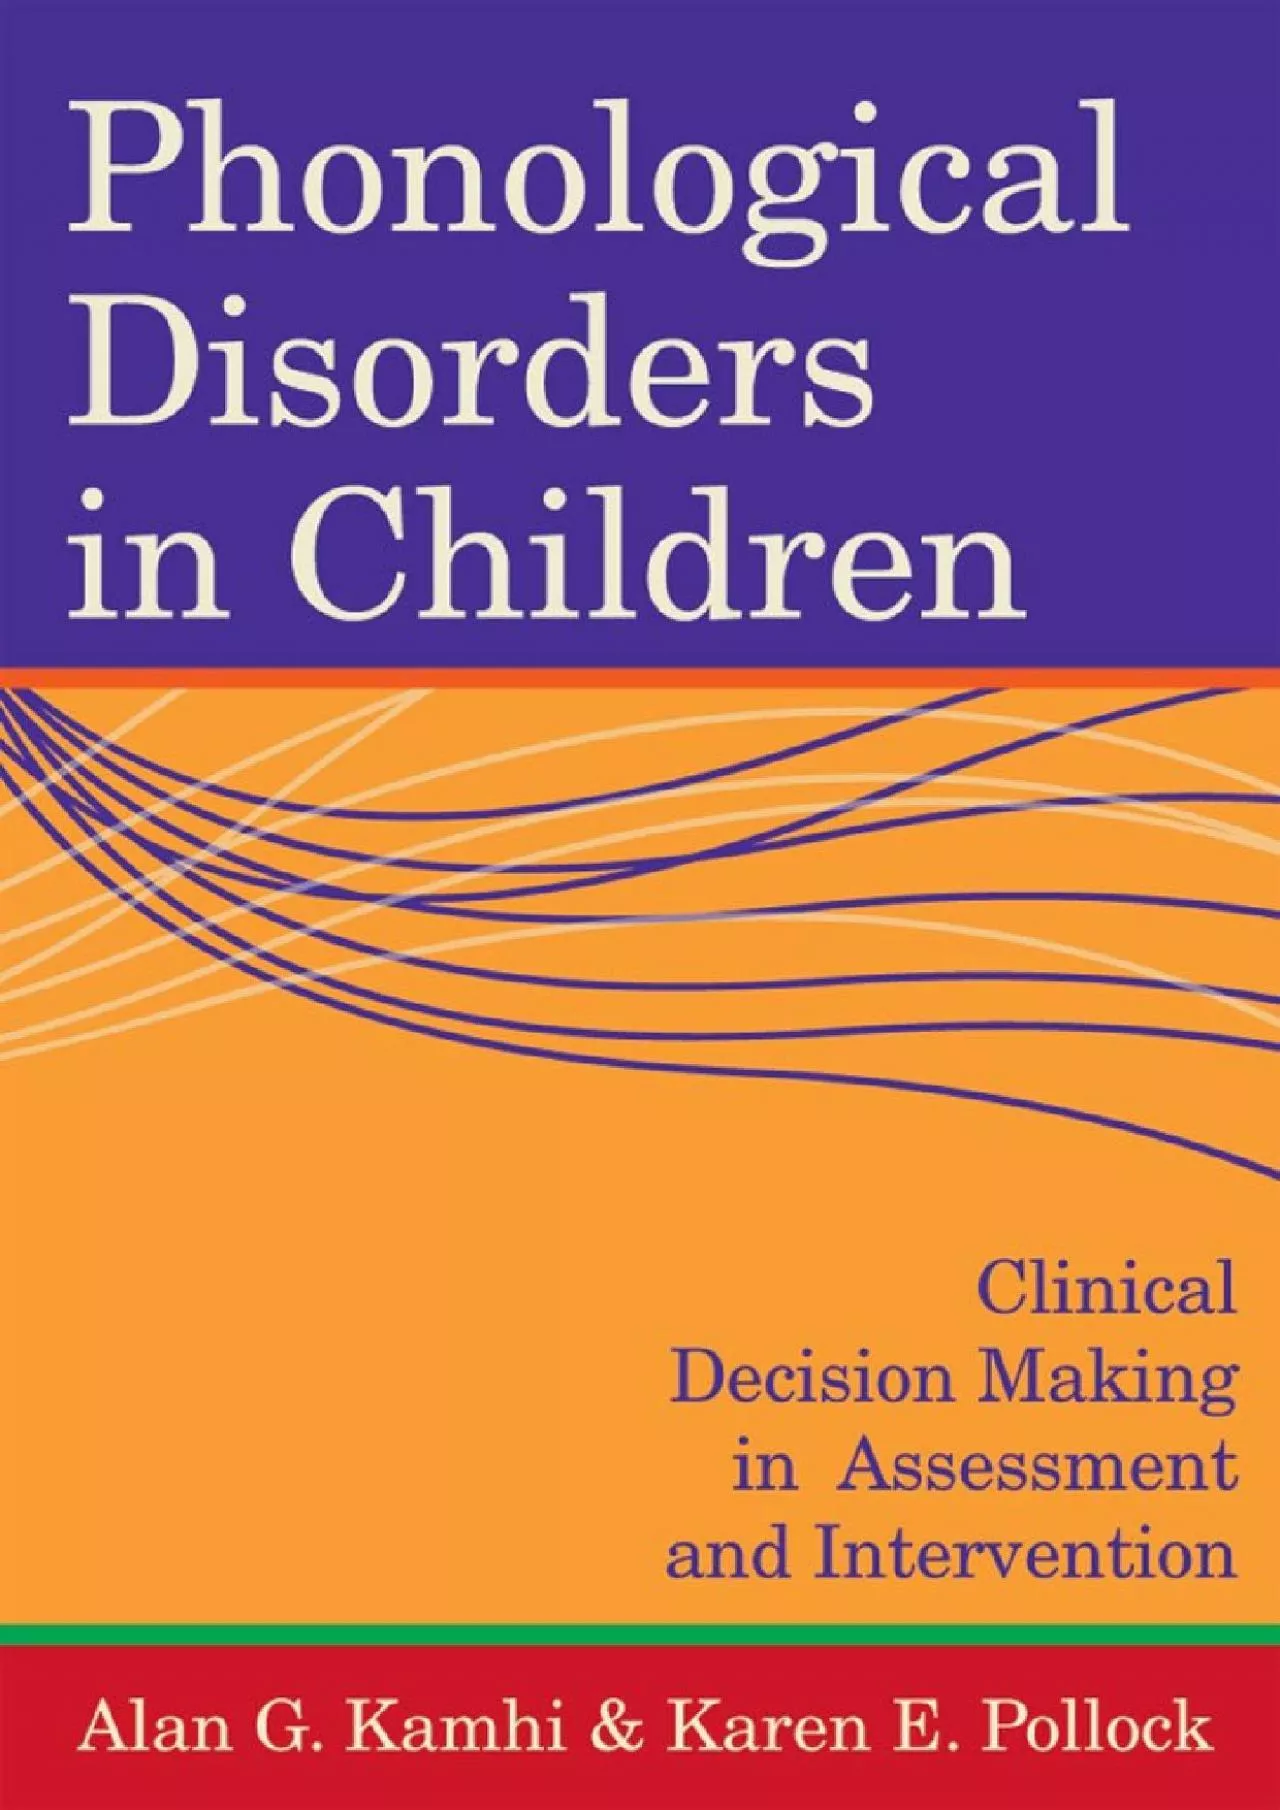 (DOWNLOAD)-Phonological Disorders in Children: Clinical Decision Making in Assessment